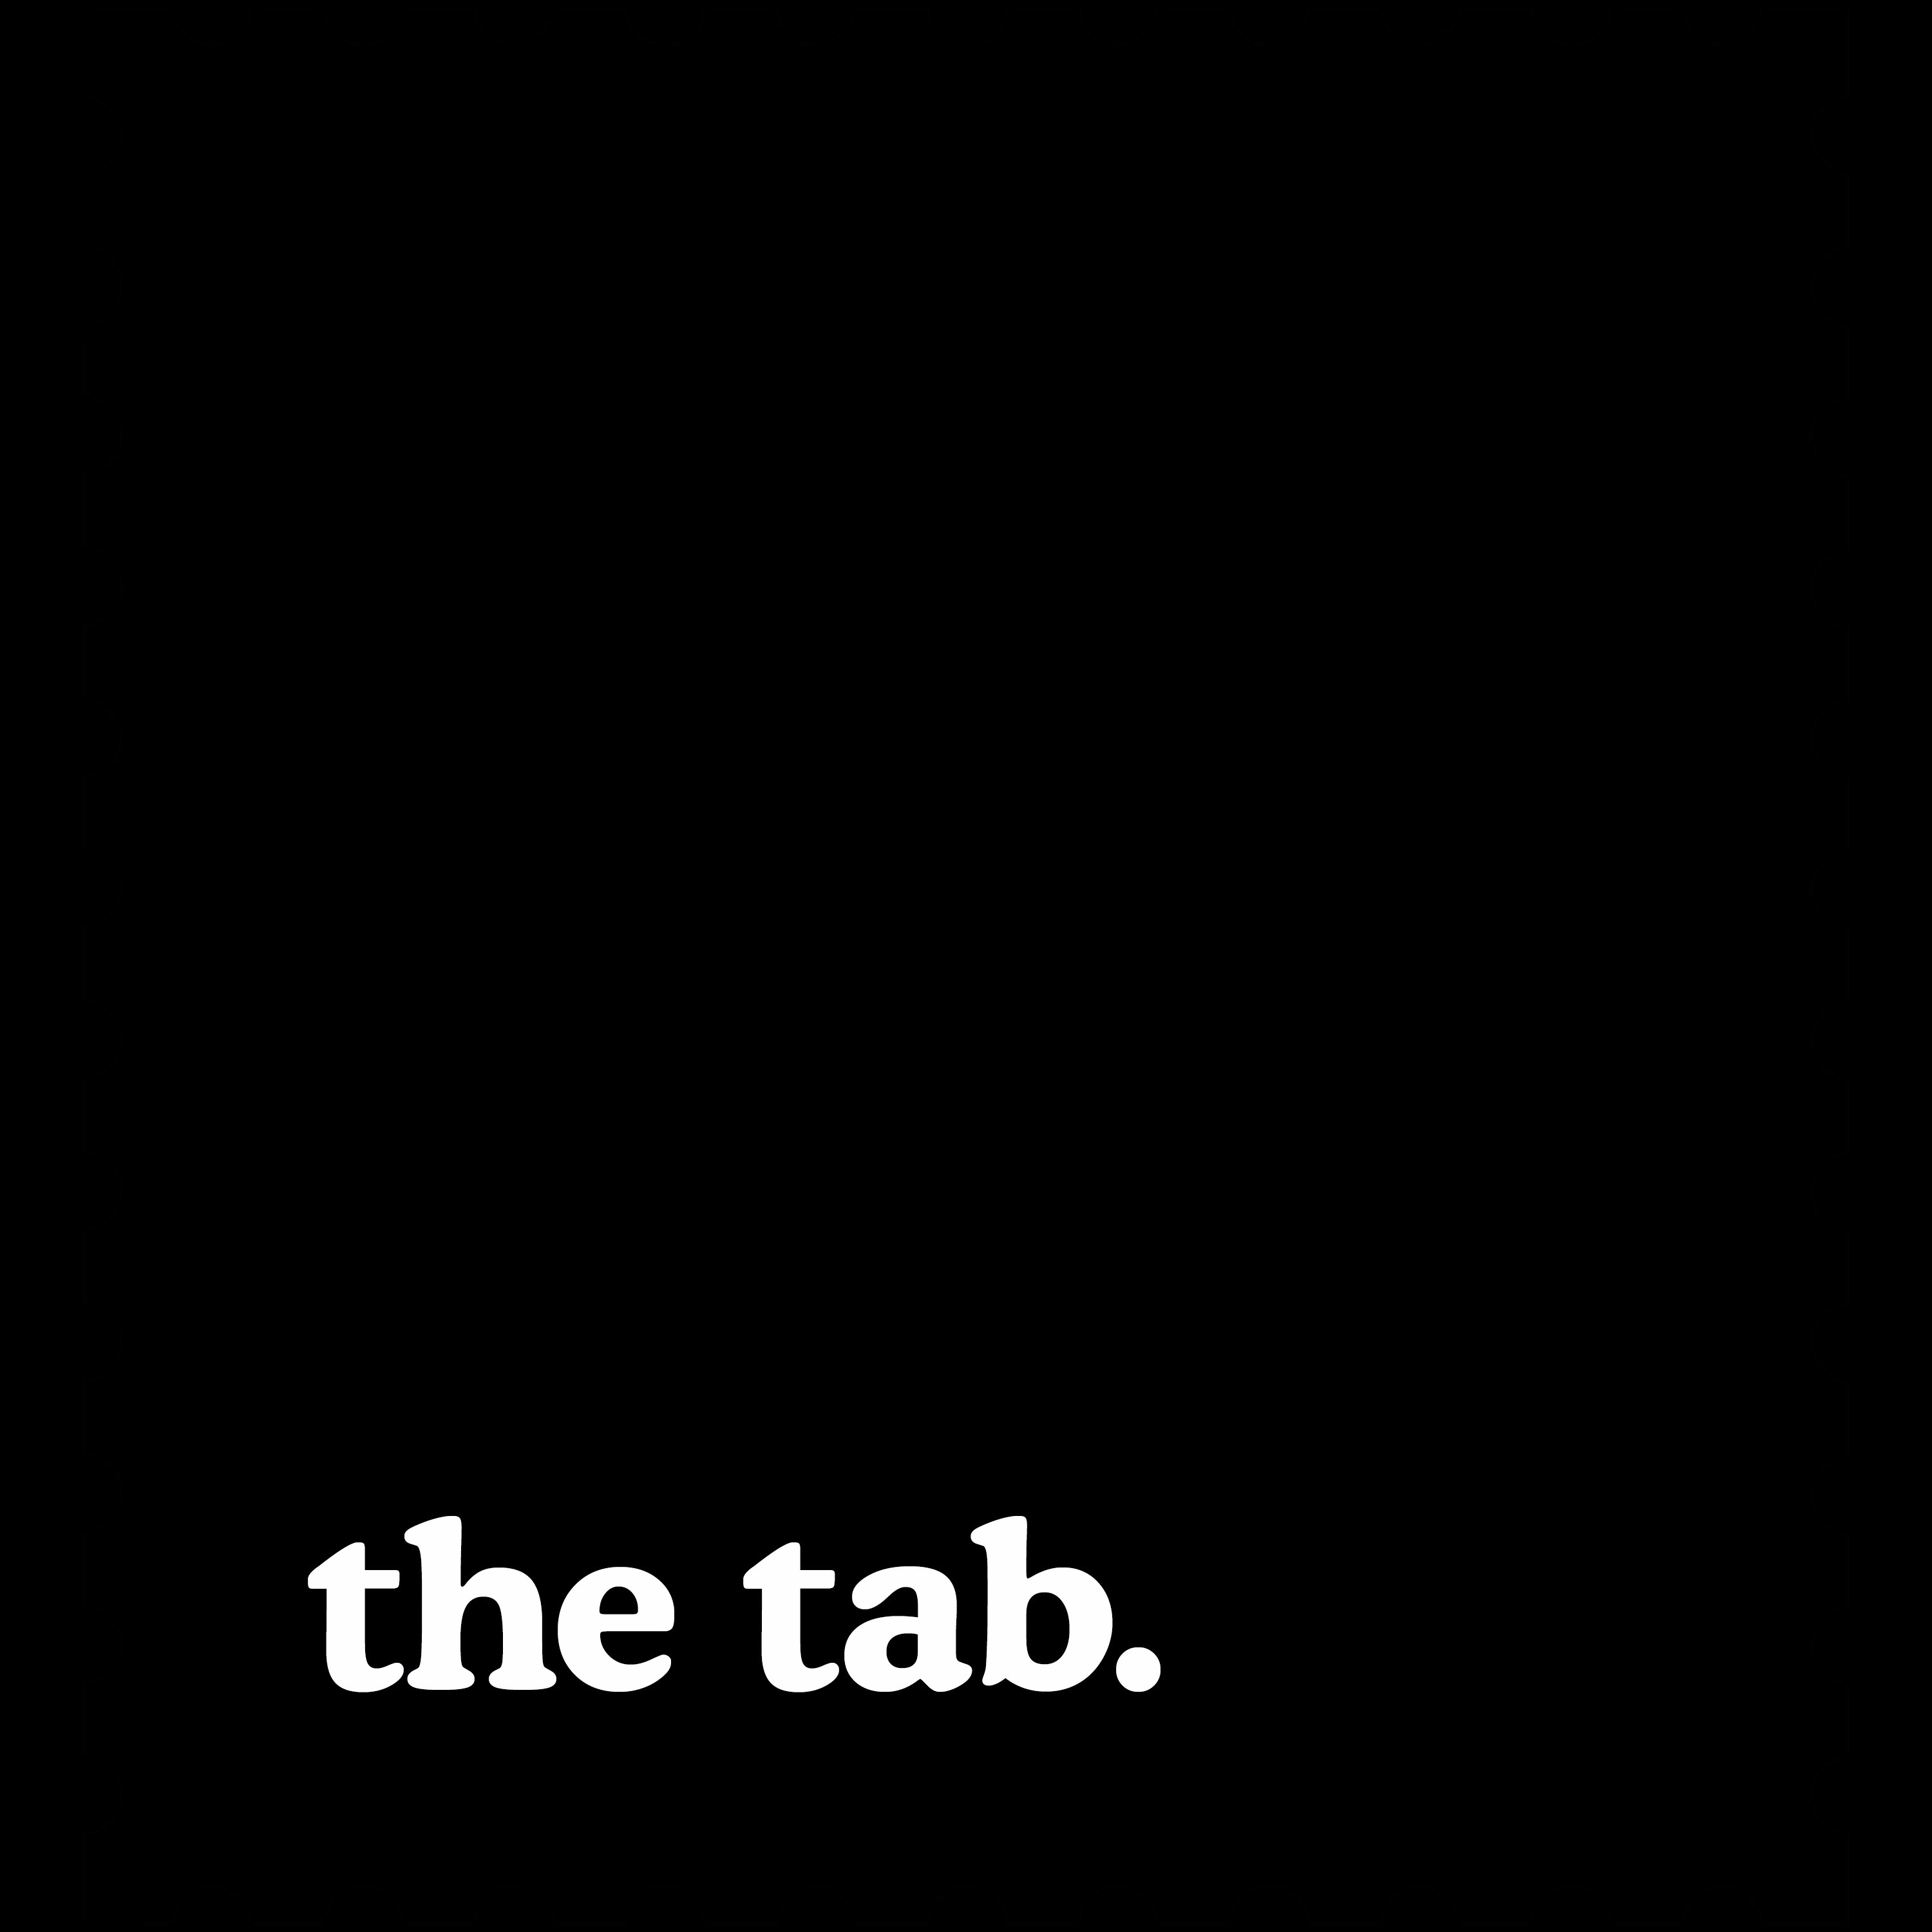 Introducing the tab